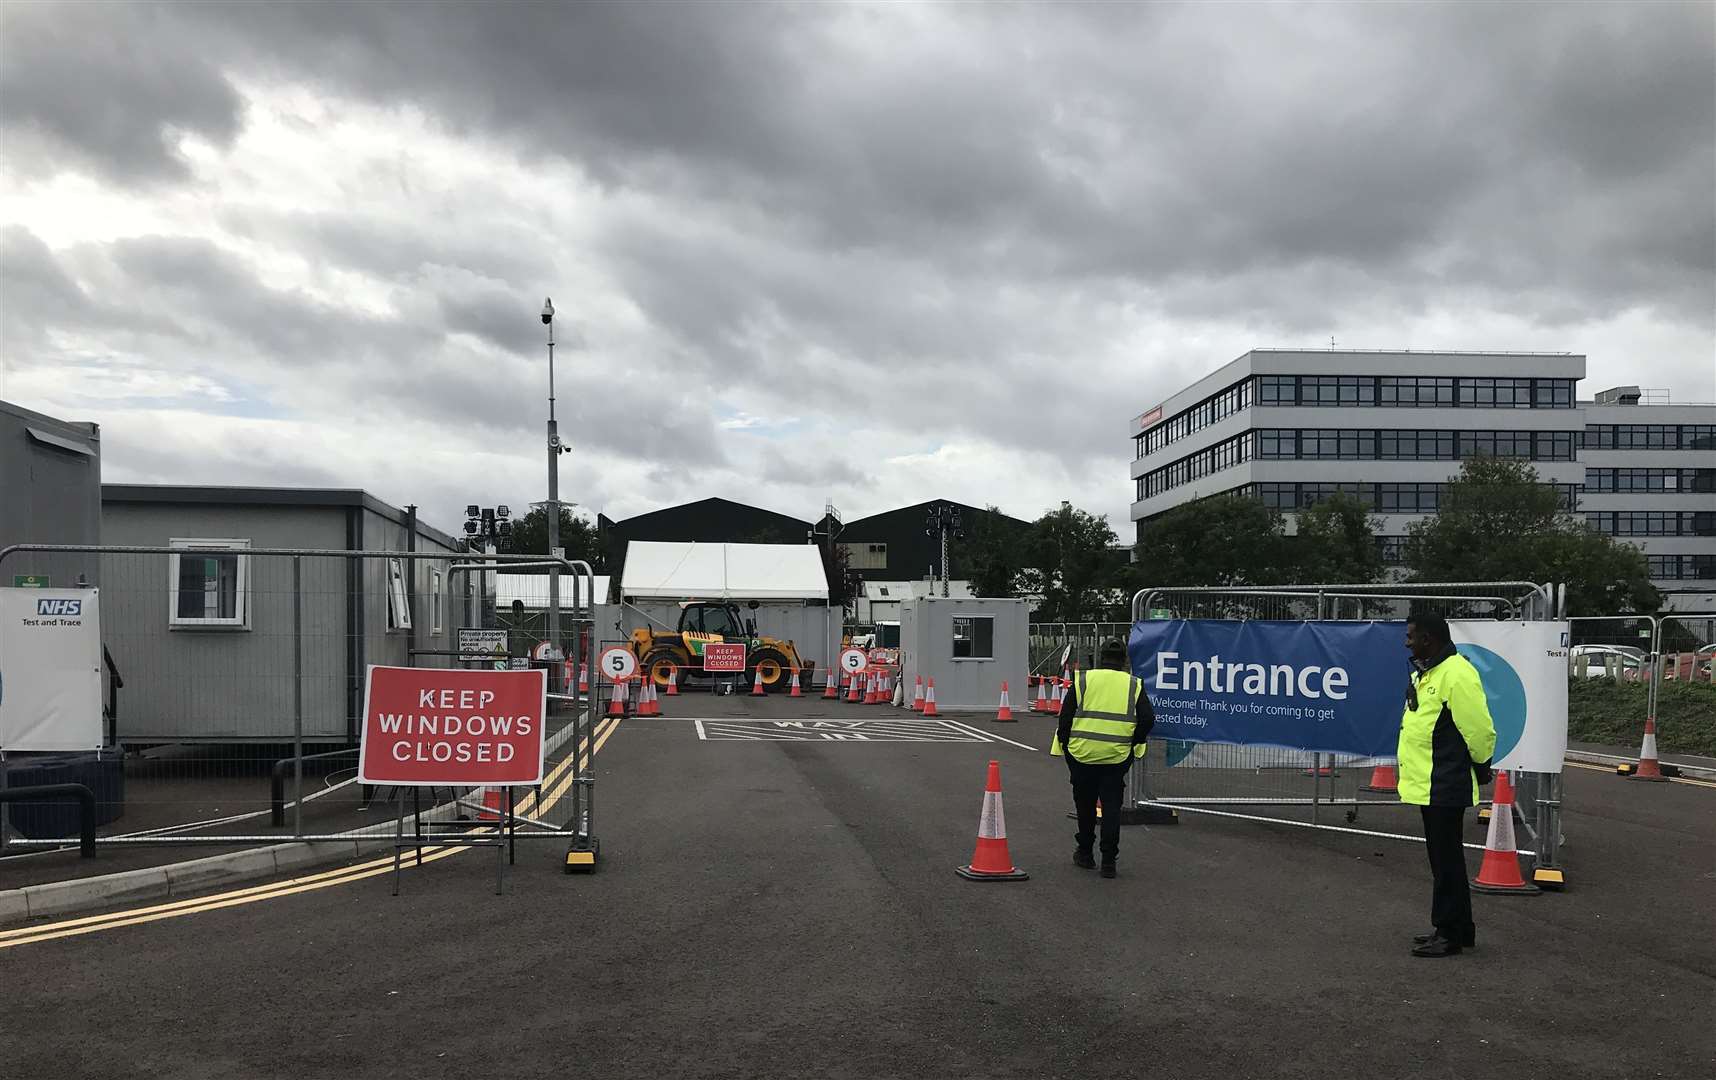 The new testing centre in Curtis Way, Rochester is set to open and will be replacing the Ebbsfleet test site